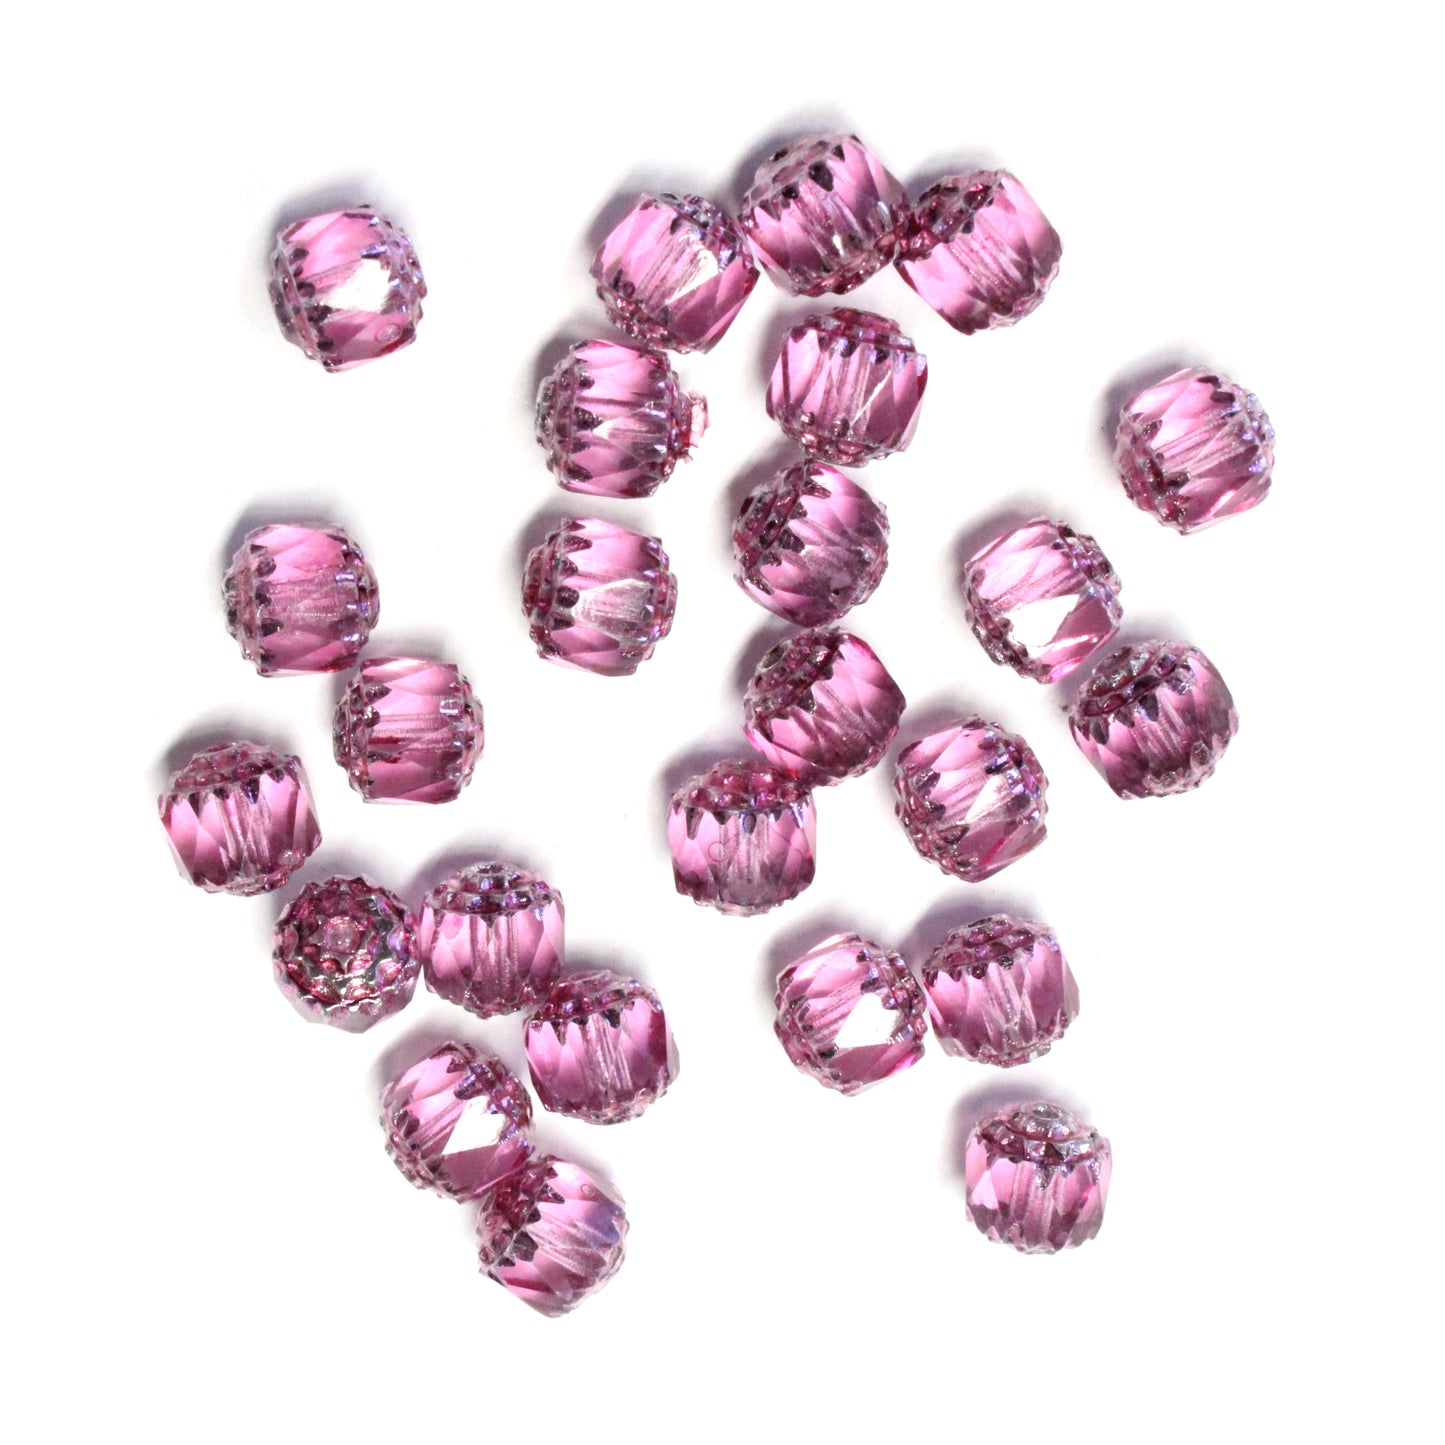 8mm Fuchsia Pink Lantern Beads / Silver Coated Ends / 25 Bead Pack